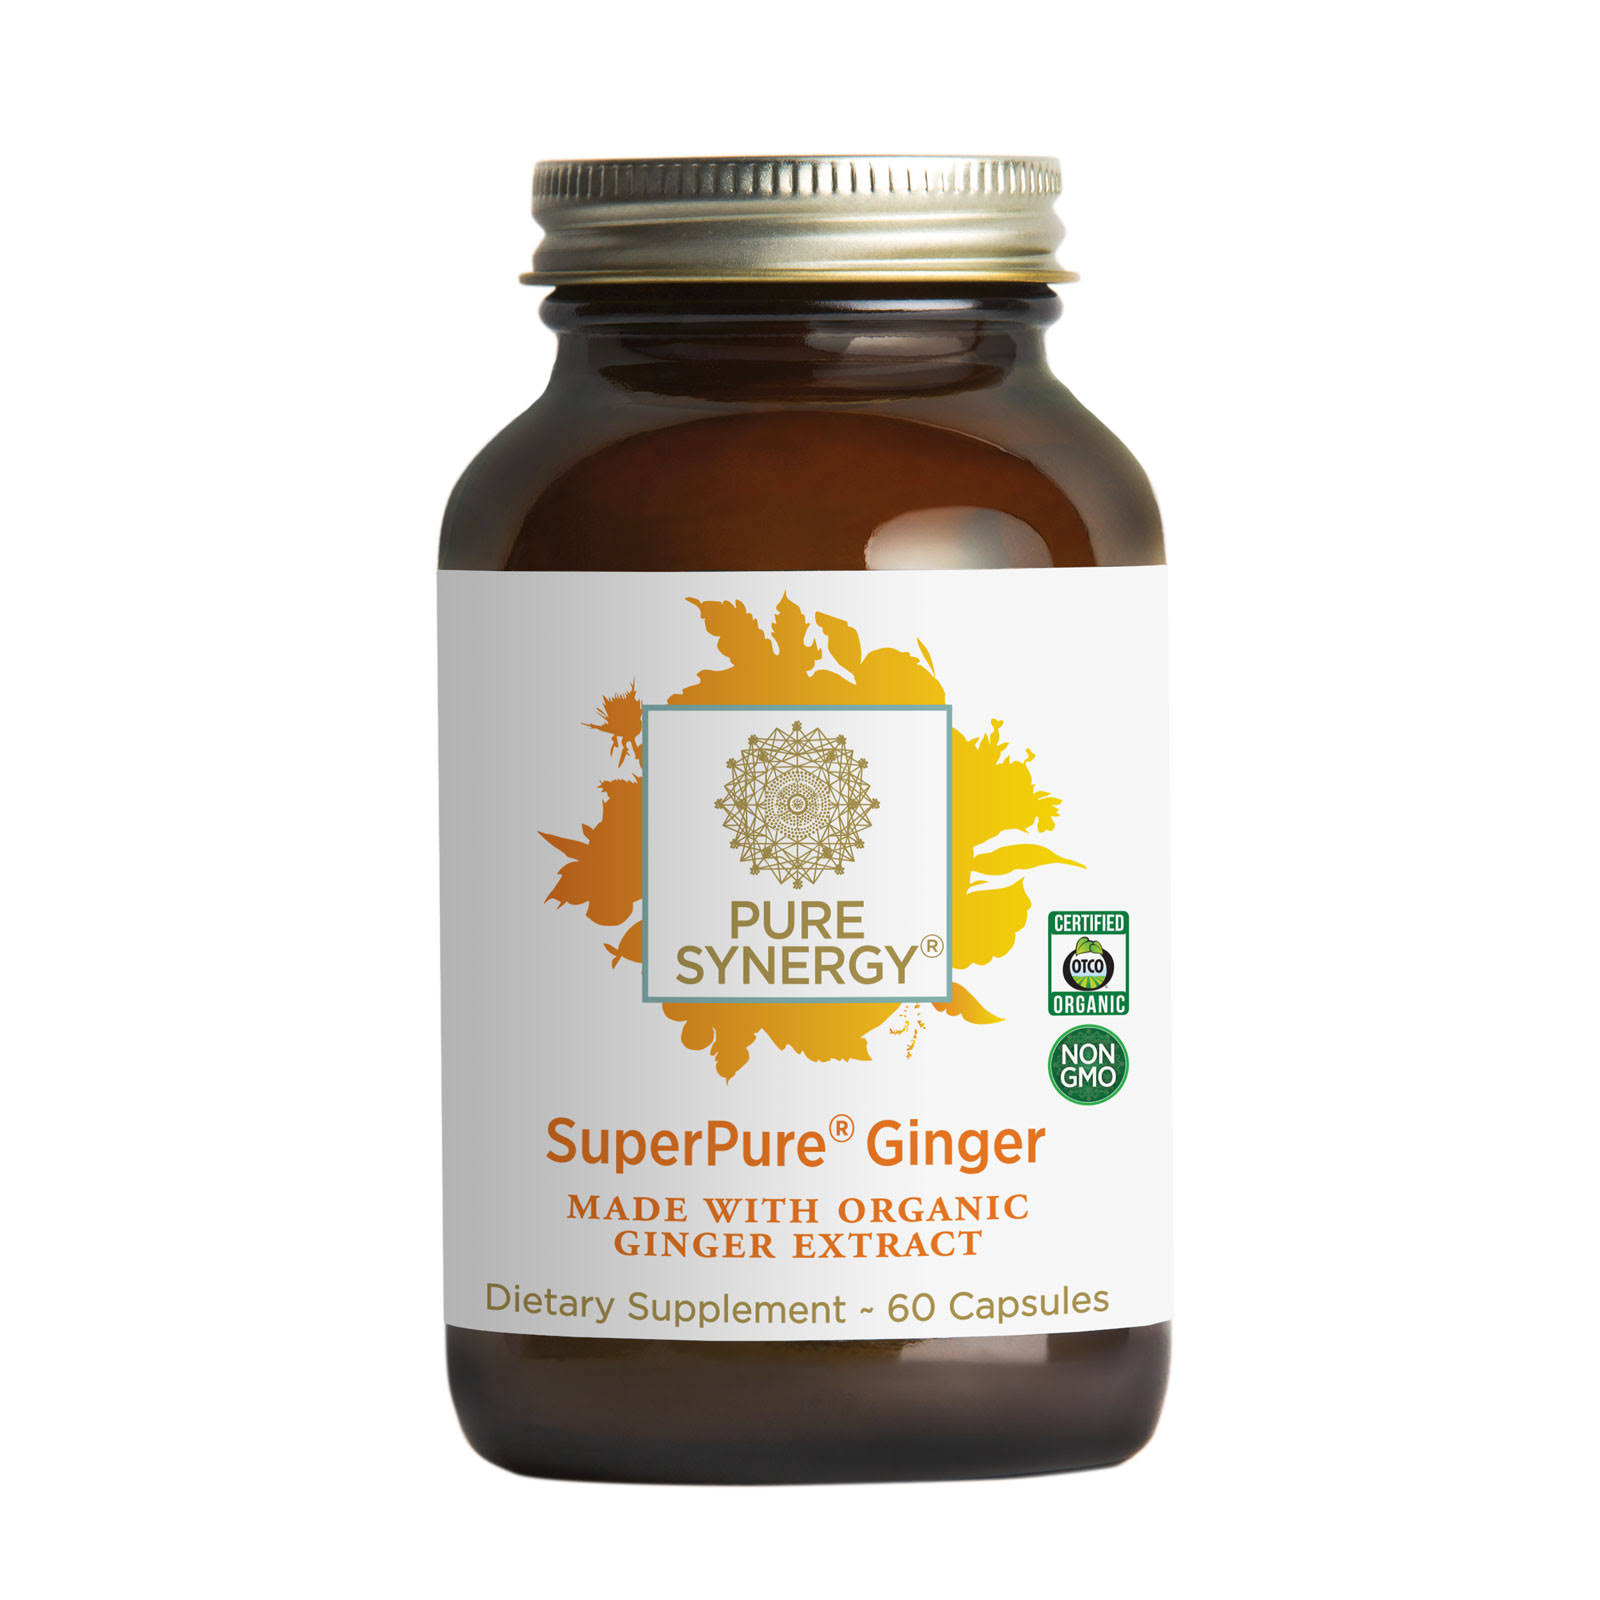 Synergy Company Superpure Organic Ginger Extract Supplement - 60 Organic Capsules